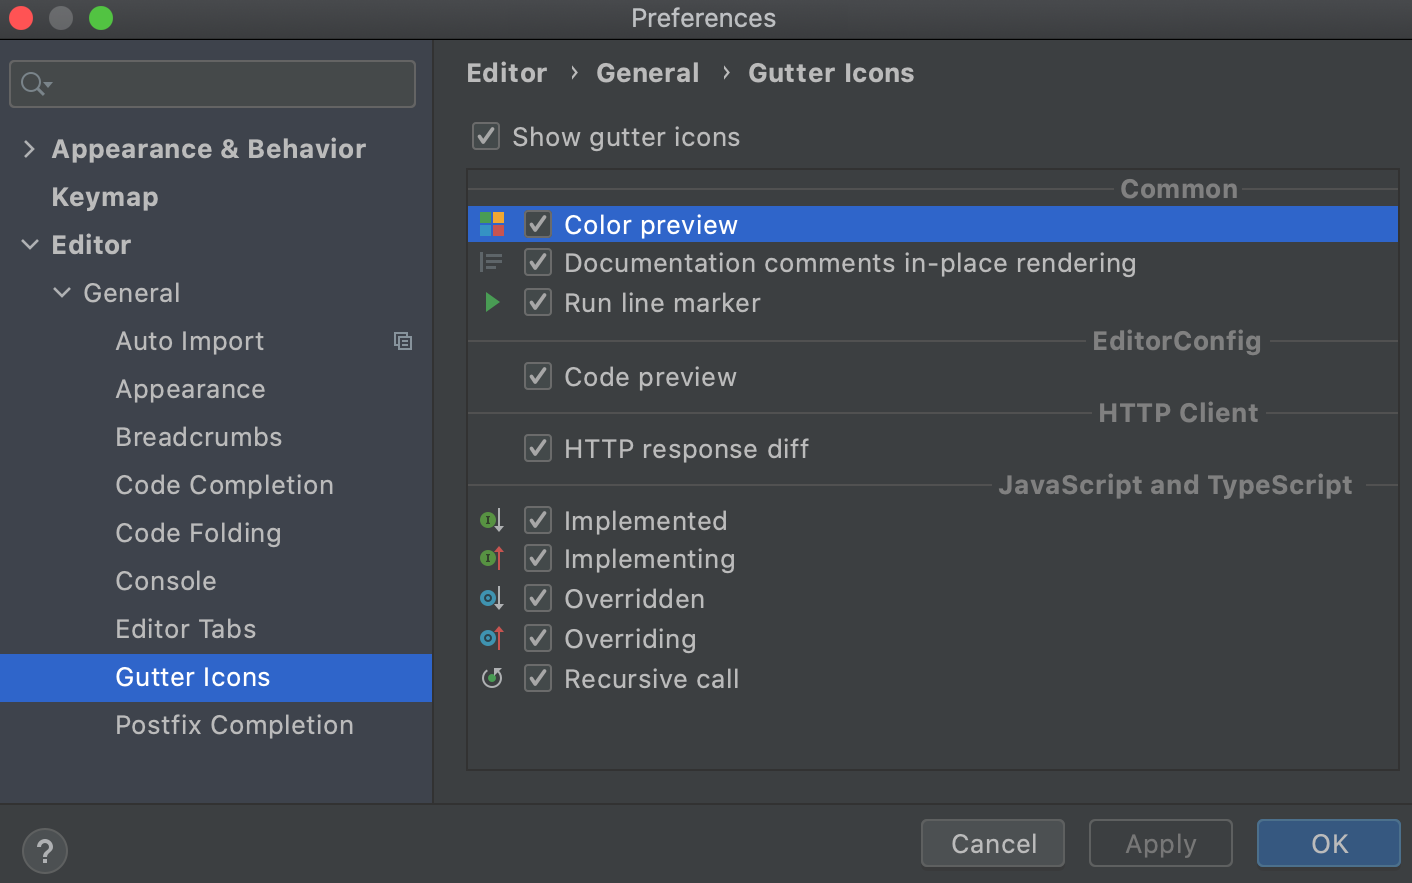 Gutter icons settings in the Preferences dialog